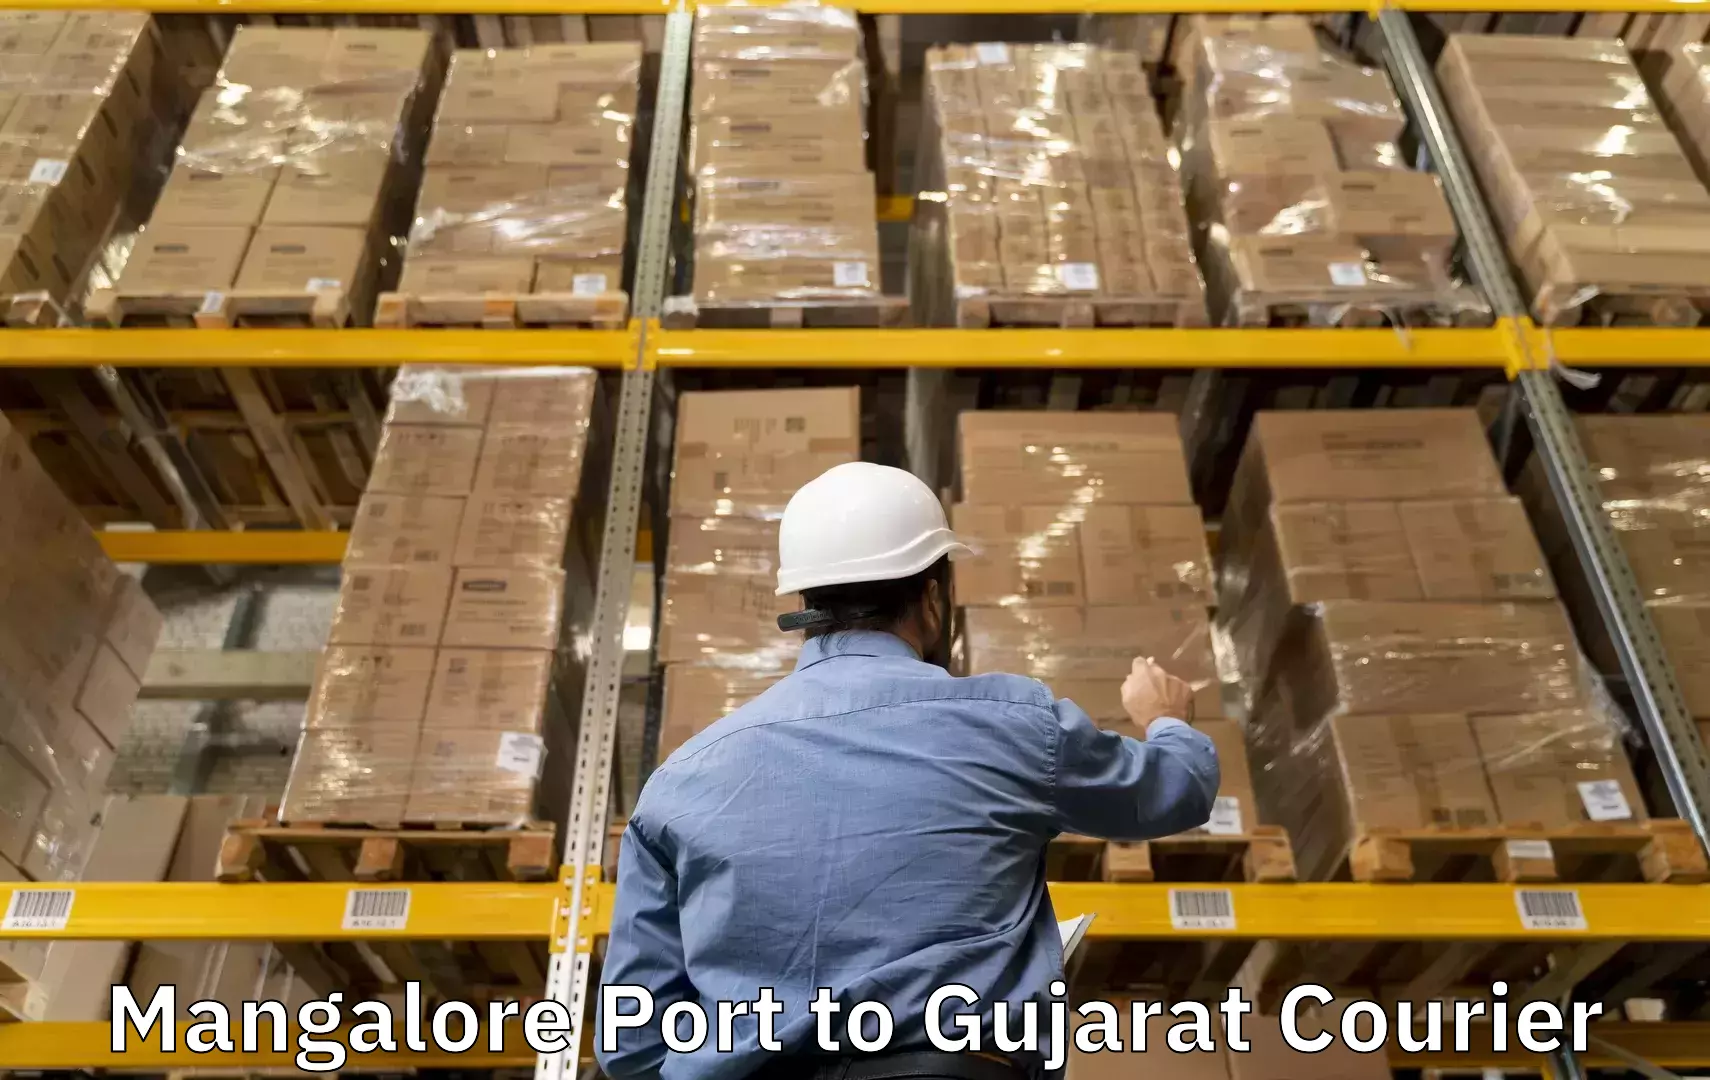 Holiday season luggage delivery Mangalore Port to Gujarat